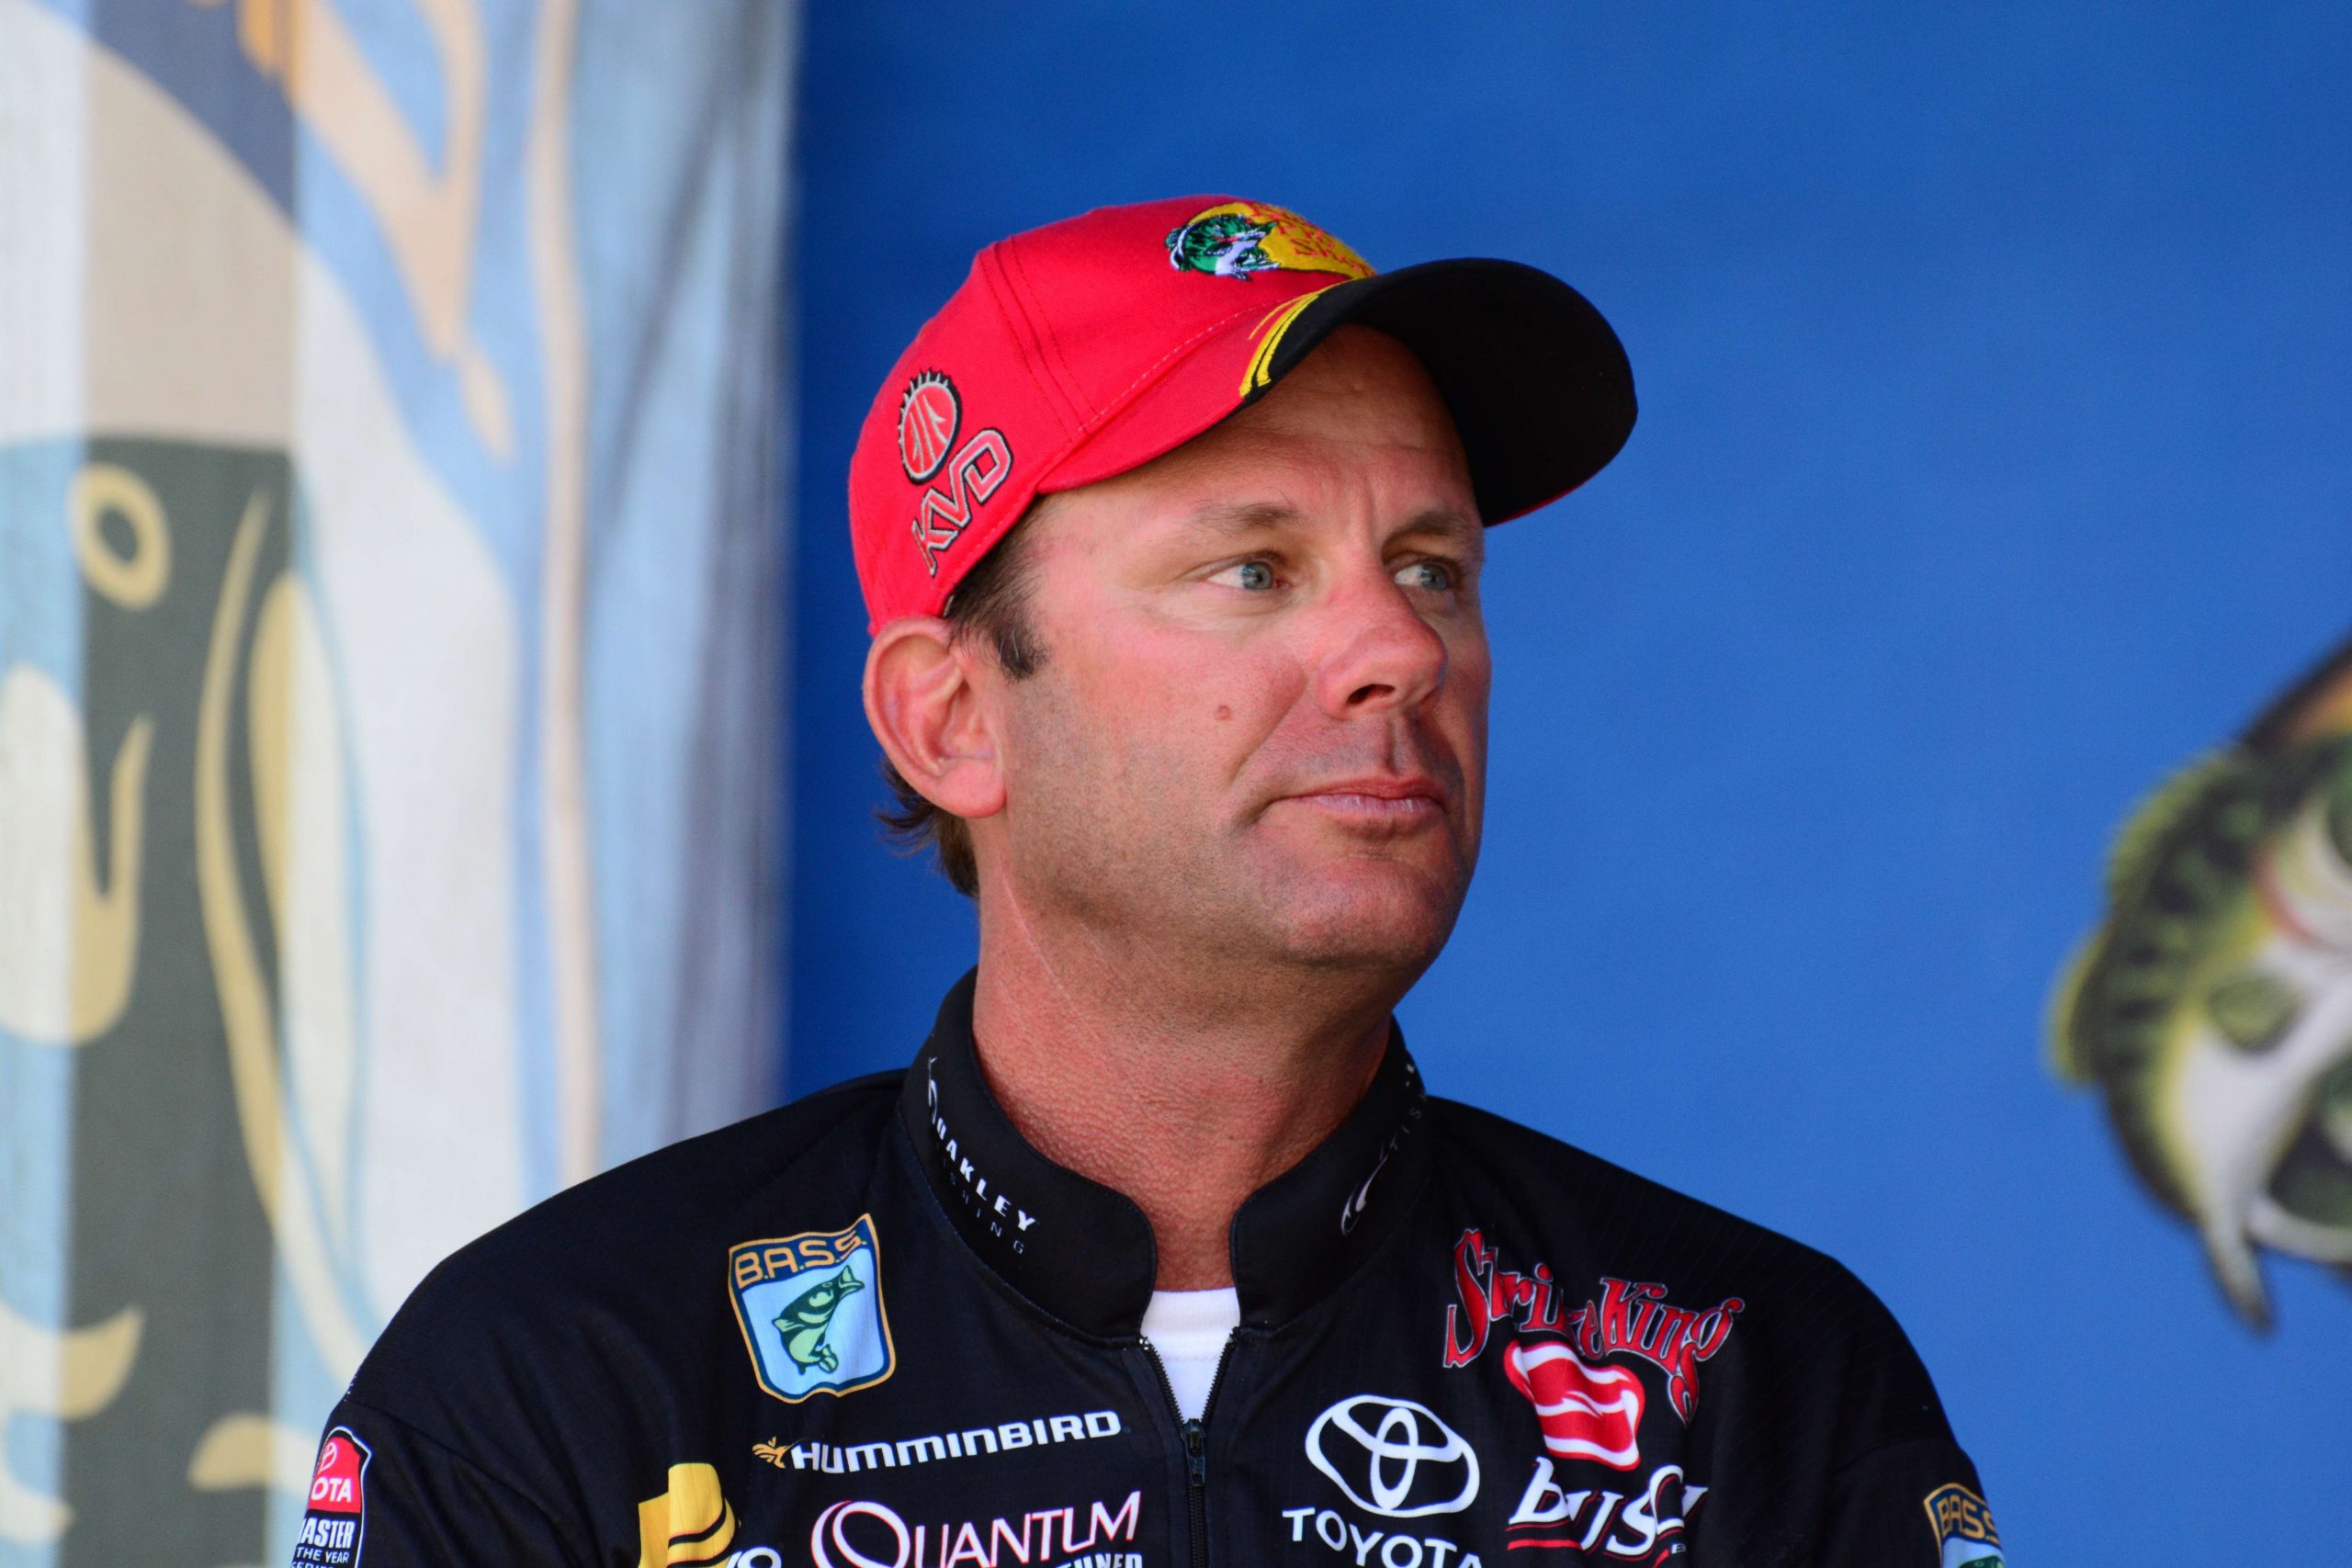 <p><strong>Kevin VanDam - 5:1</strong></p>
<p>Yes, that's right. It's KVD again. He was third here in 2008 and almost....</p>
<p> </p>
<p>What?</p>
<p> </p>
<p>You're joking! He didn't qualify? How is that even possible? Are we talking about the same VanDam?</p>
<p> </p>
<p>Well ... OK ... I guess I have to pick a different favorite.</p>
